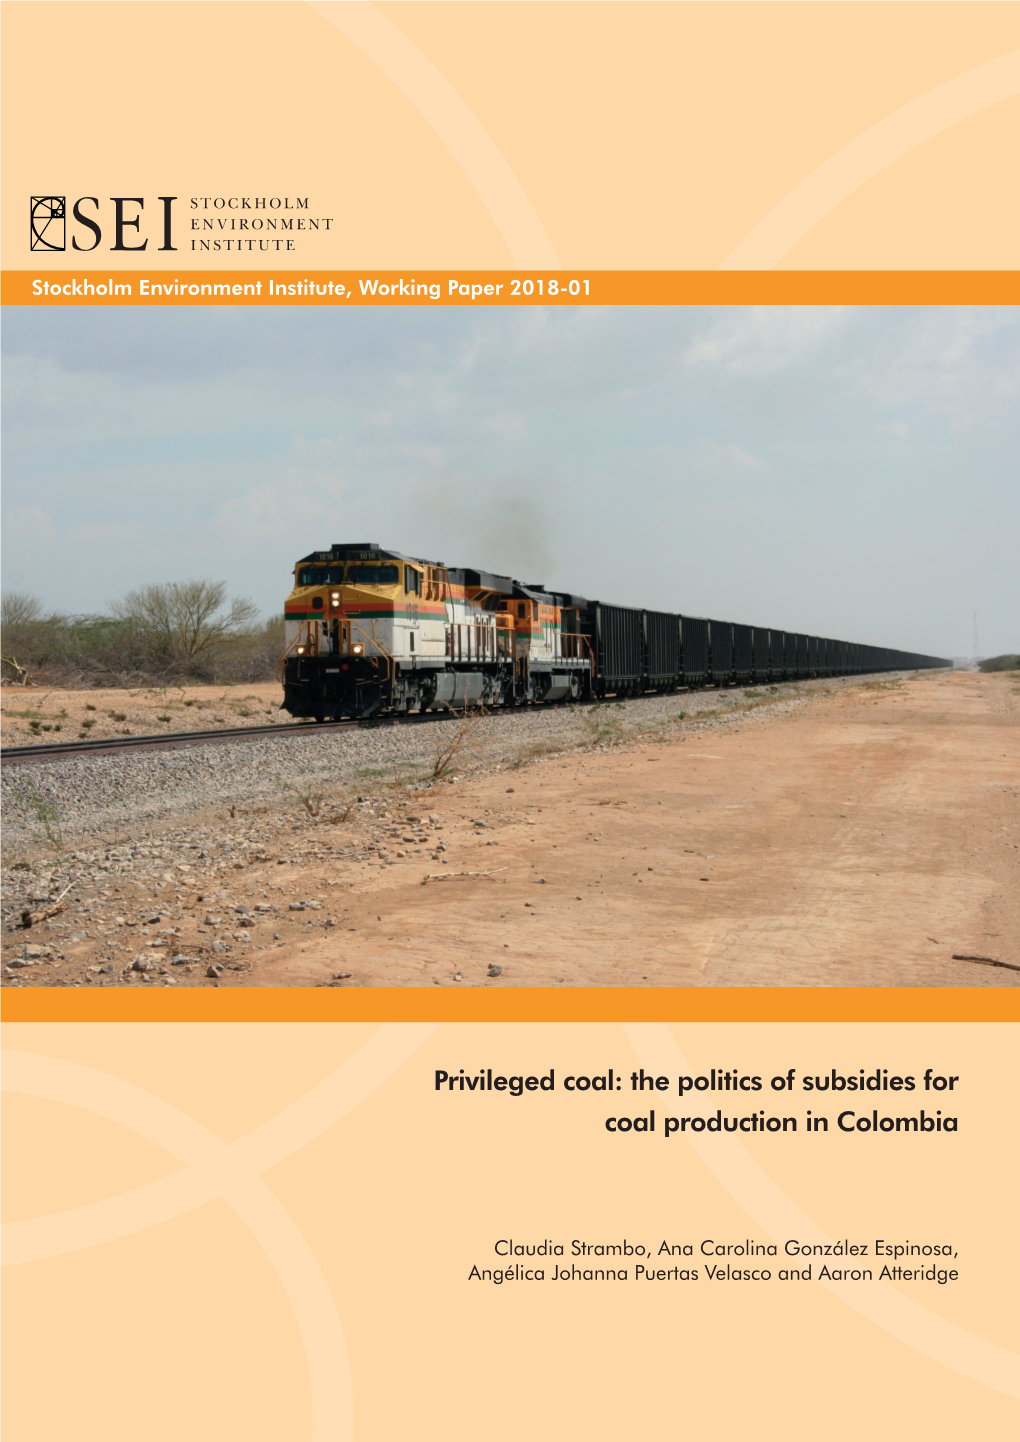 The Politics of Subsidies for Coal Production in Colombia